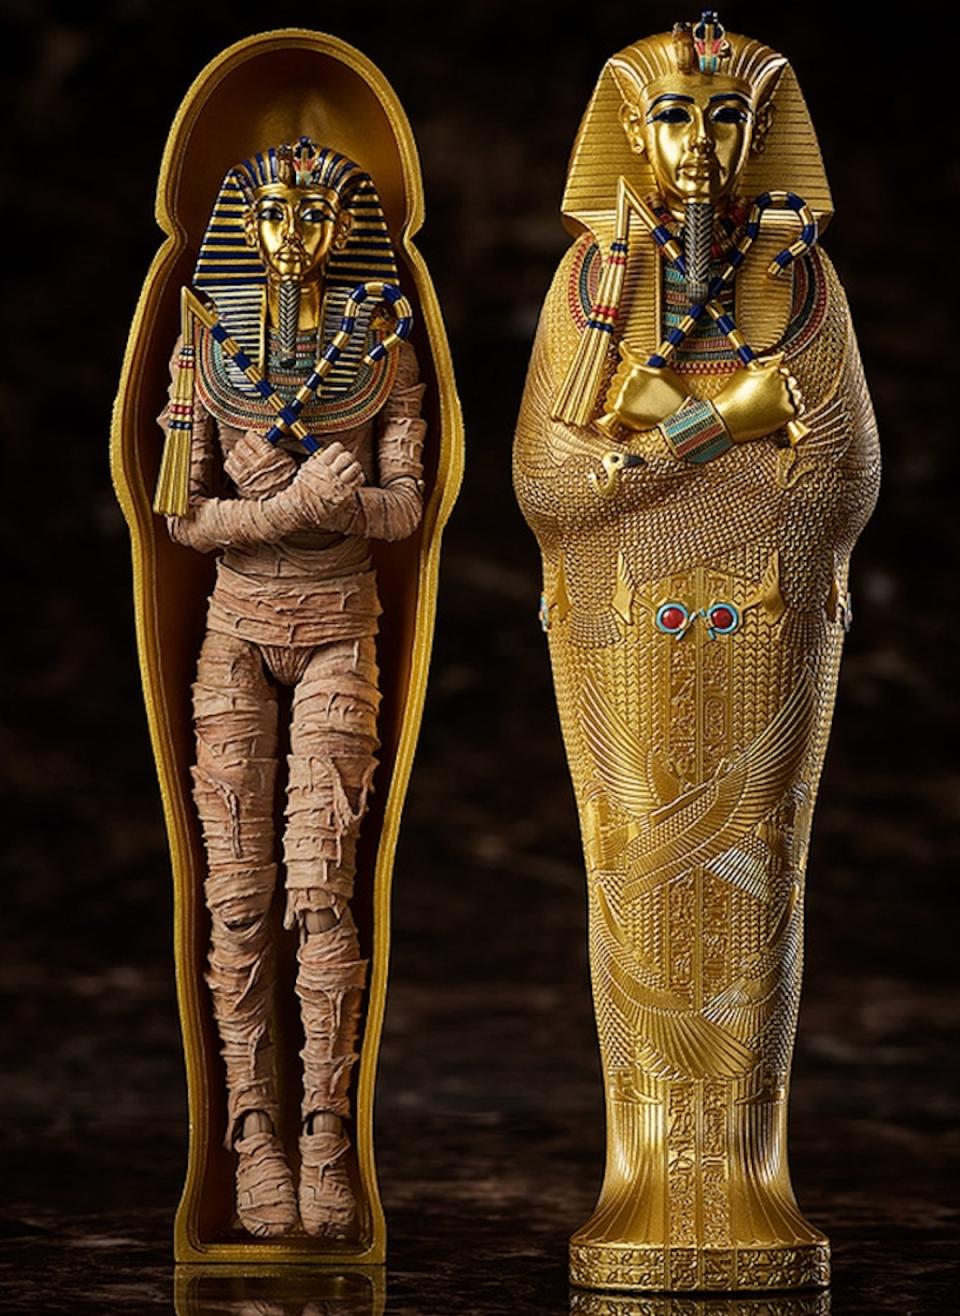 A king tut action figure inside its sarcophagus with the lid open next to the lid itself